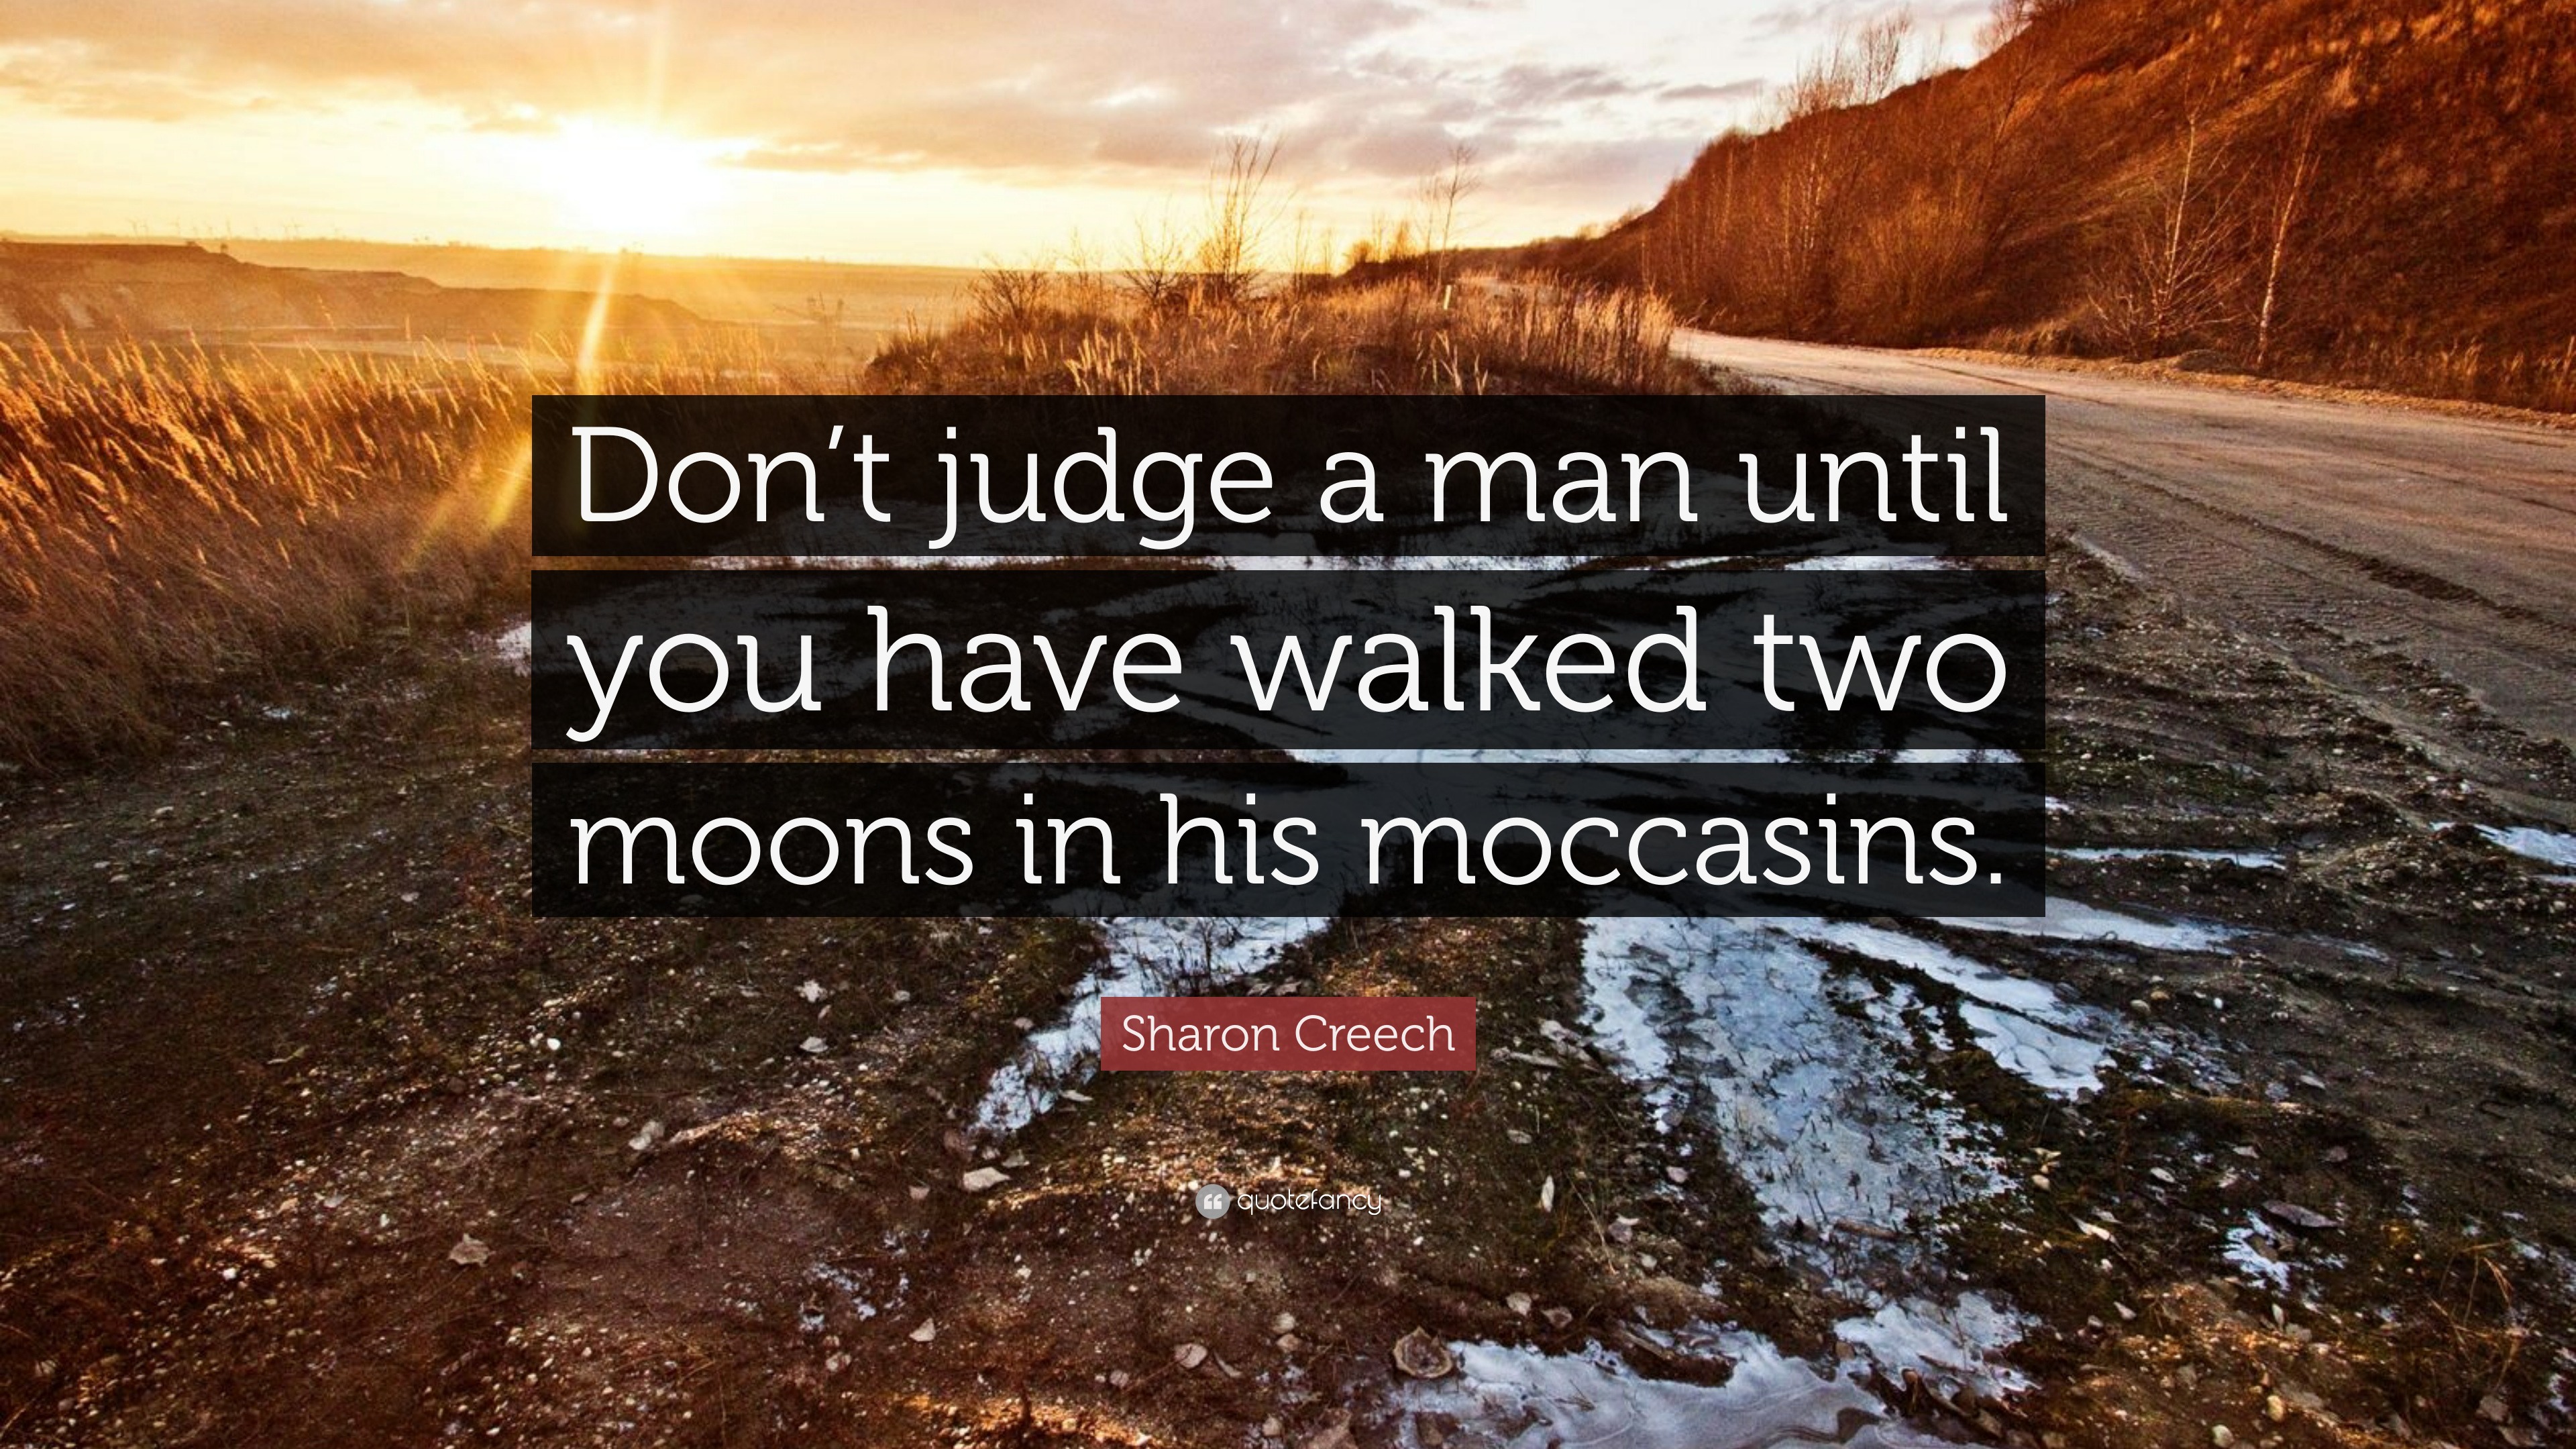 Sharon Creech Quote: “Don’t judge a man until you have walked two moons